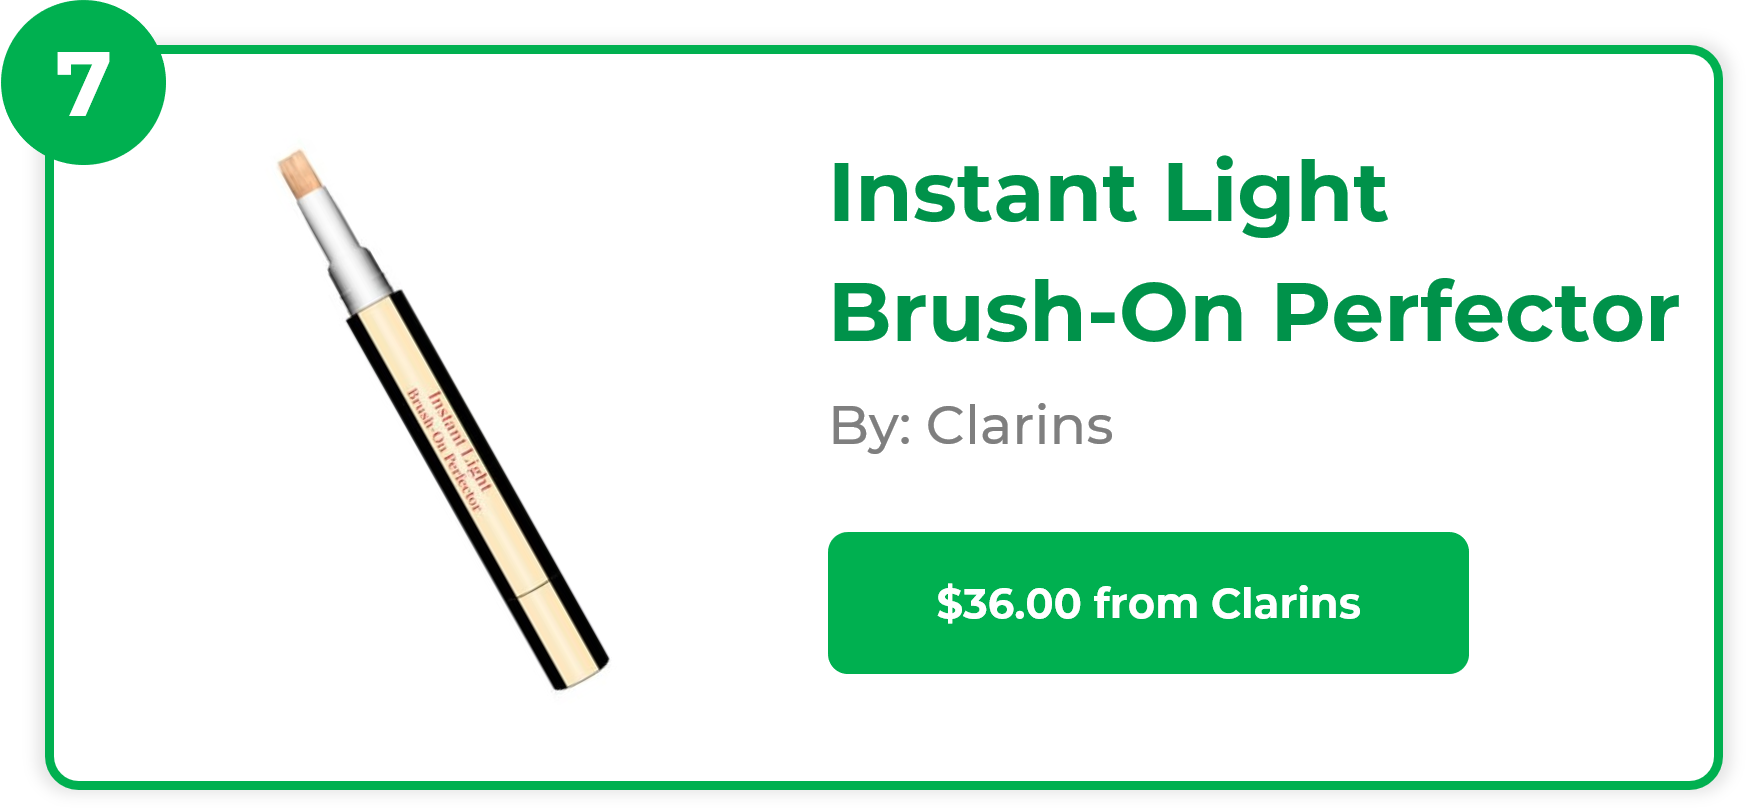 Instant Light Brush-On Perfector - Clarins